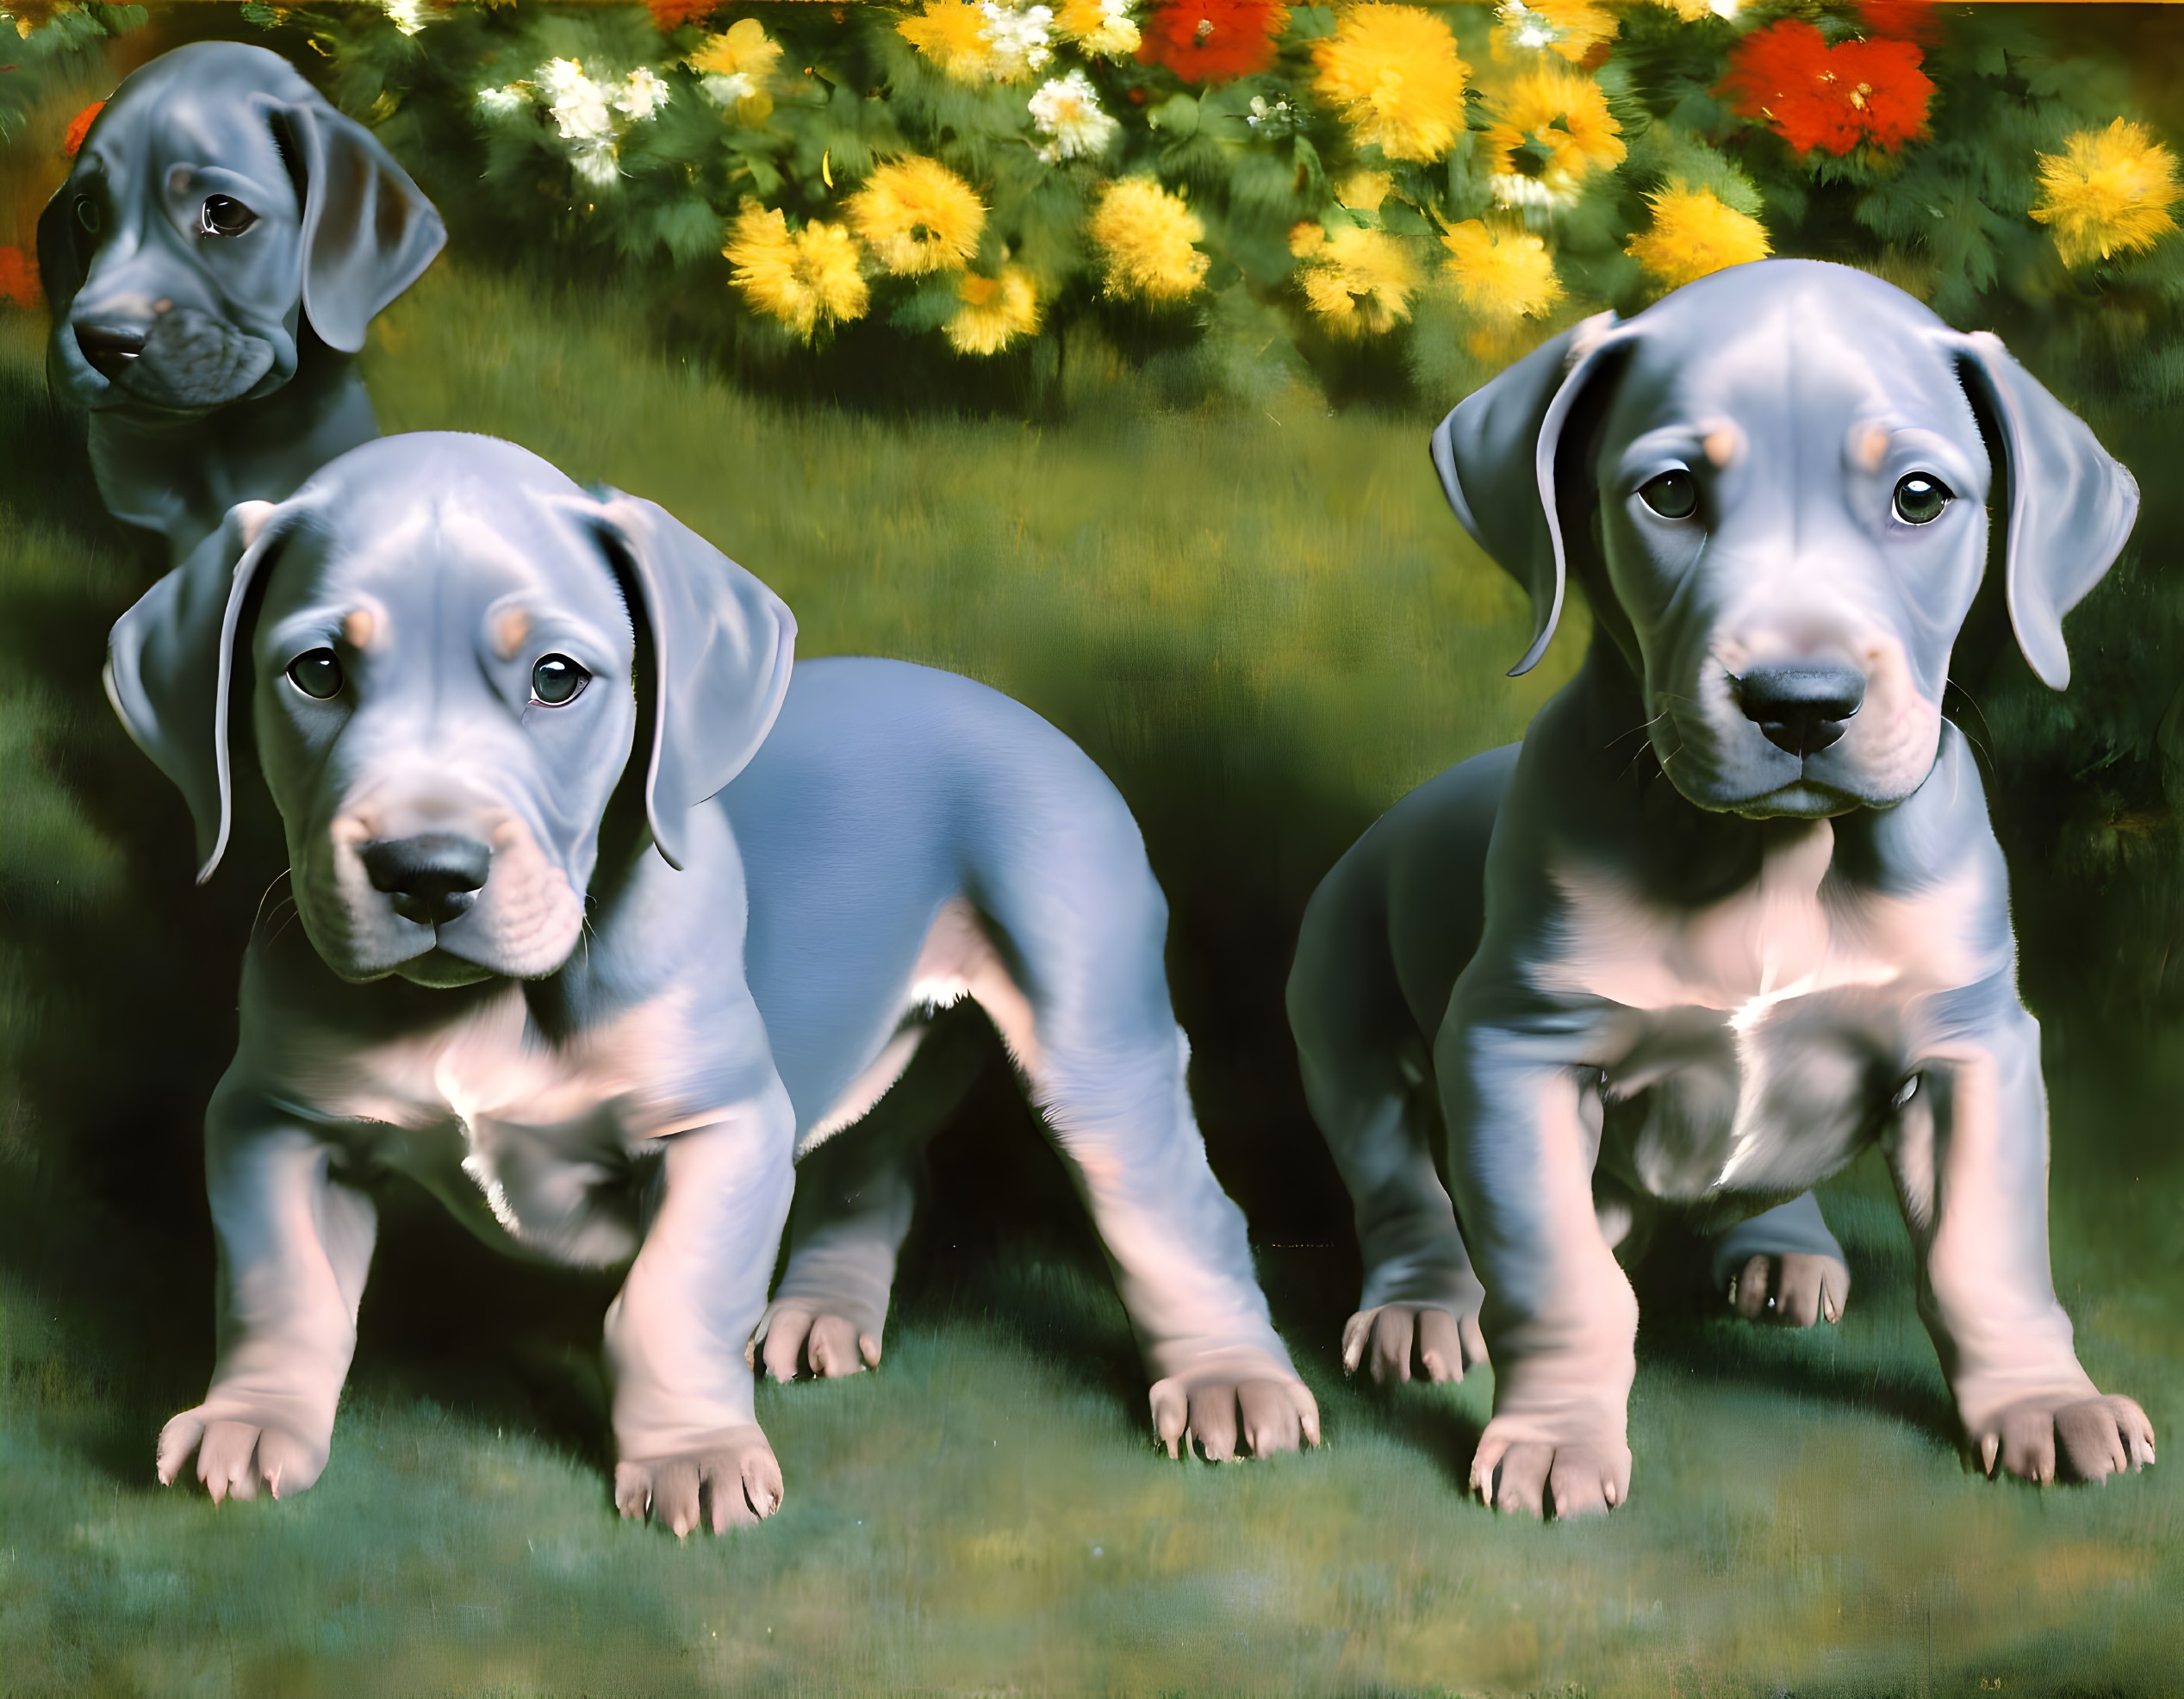 Two grey puppies with blue eyes in front of colorful flowers on dark background